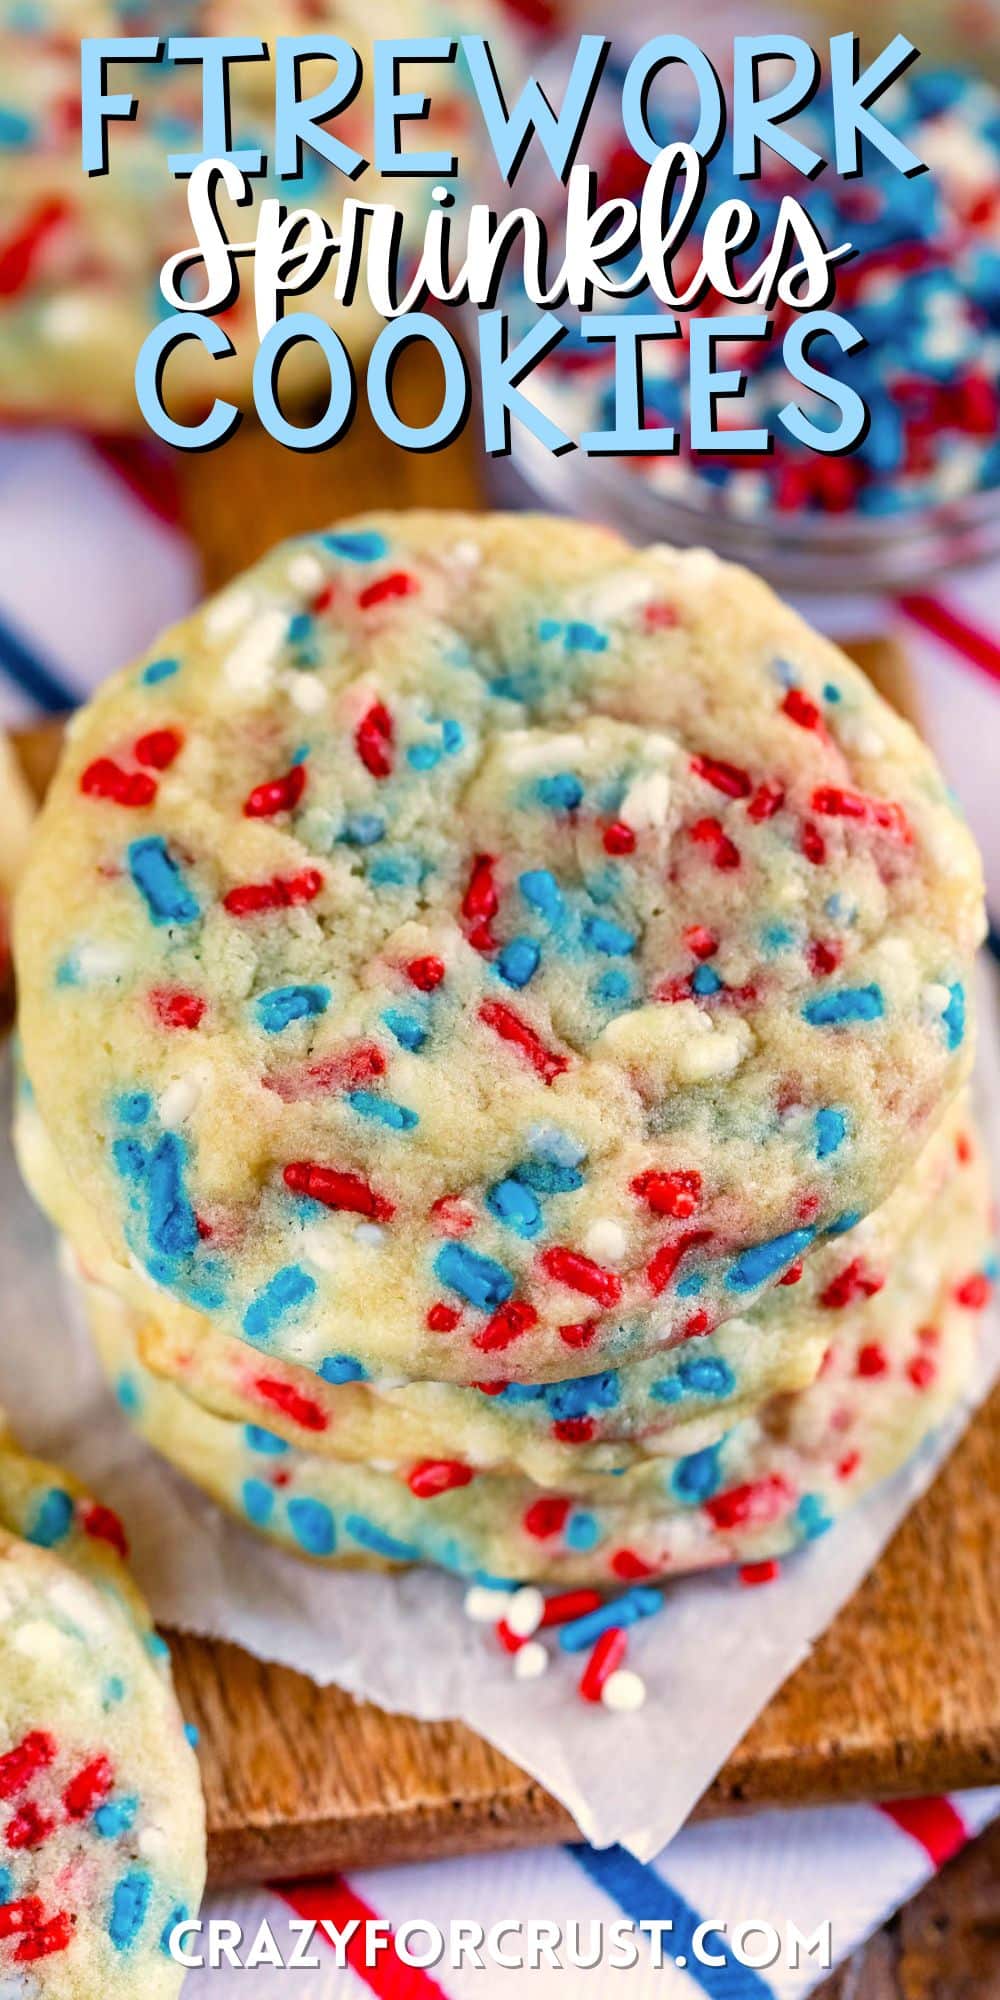 stacked cookies with red white and blue sprinkles baked in with words on the image.